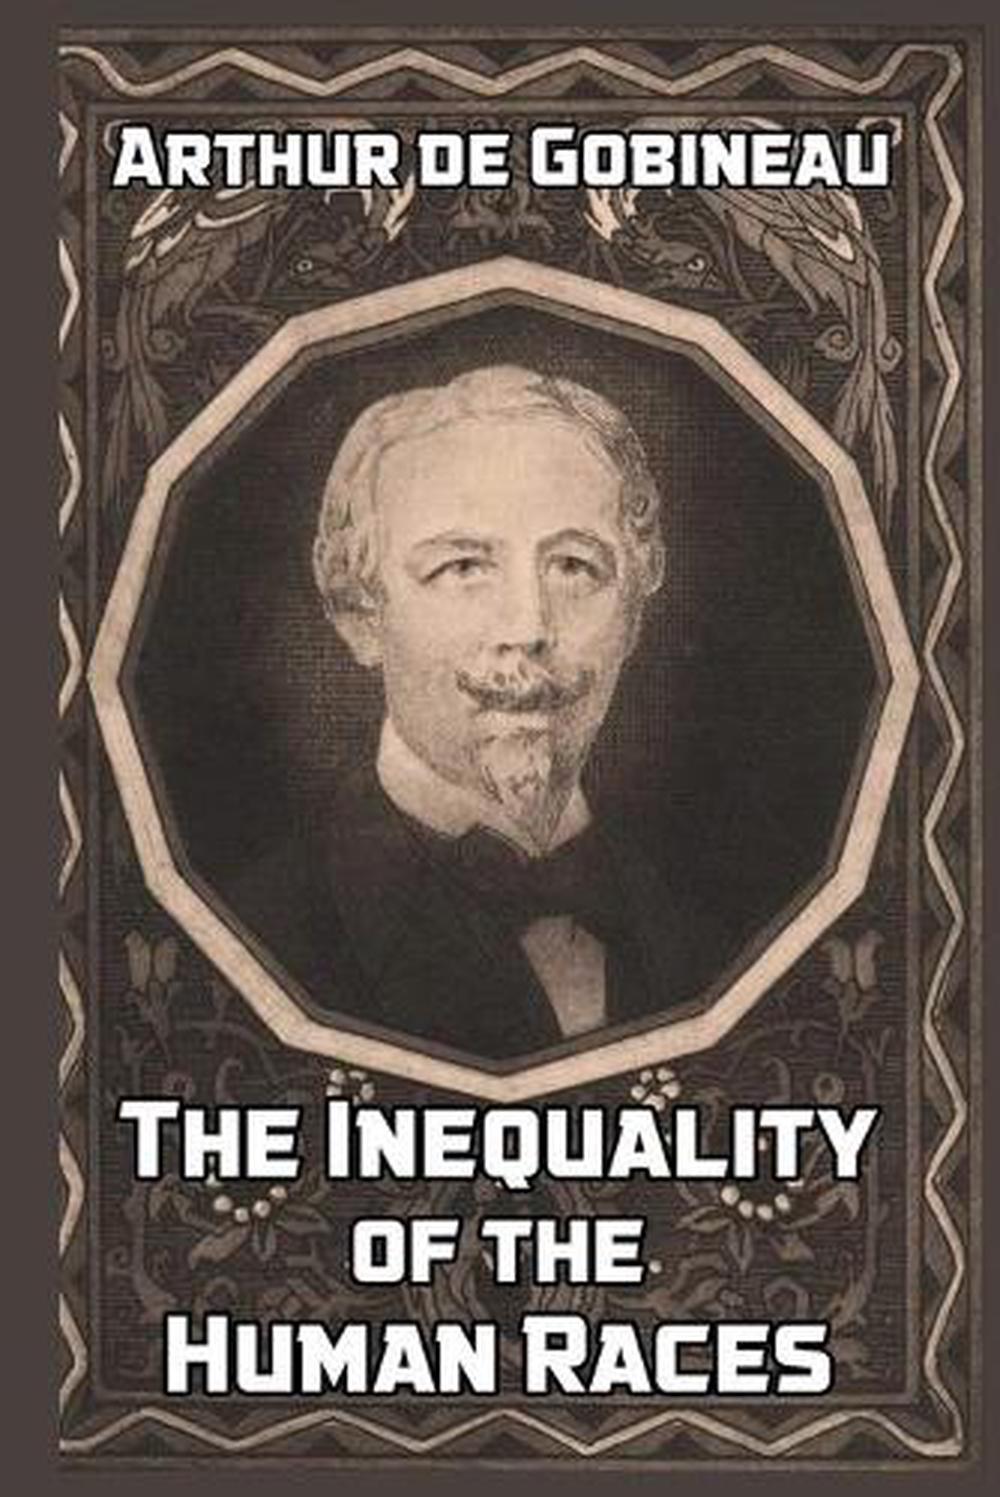 gobineau essay on the inequality of the human races